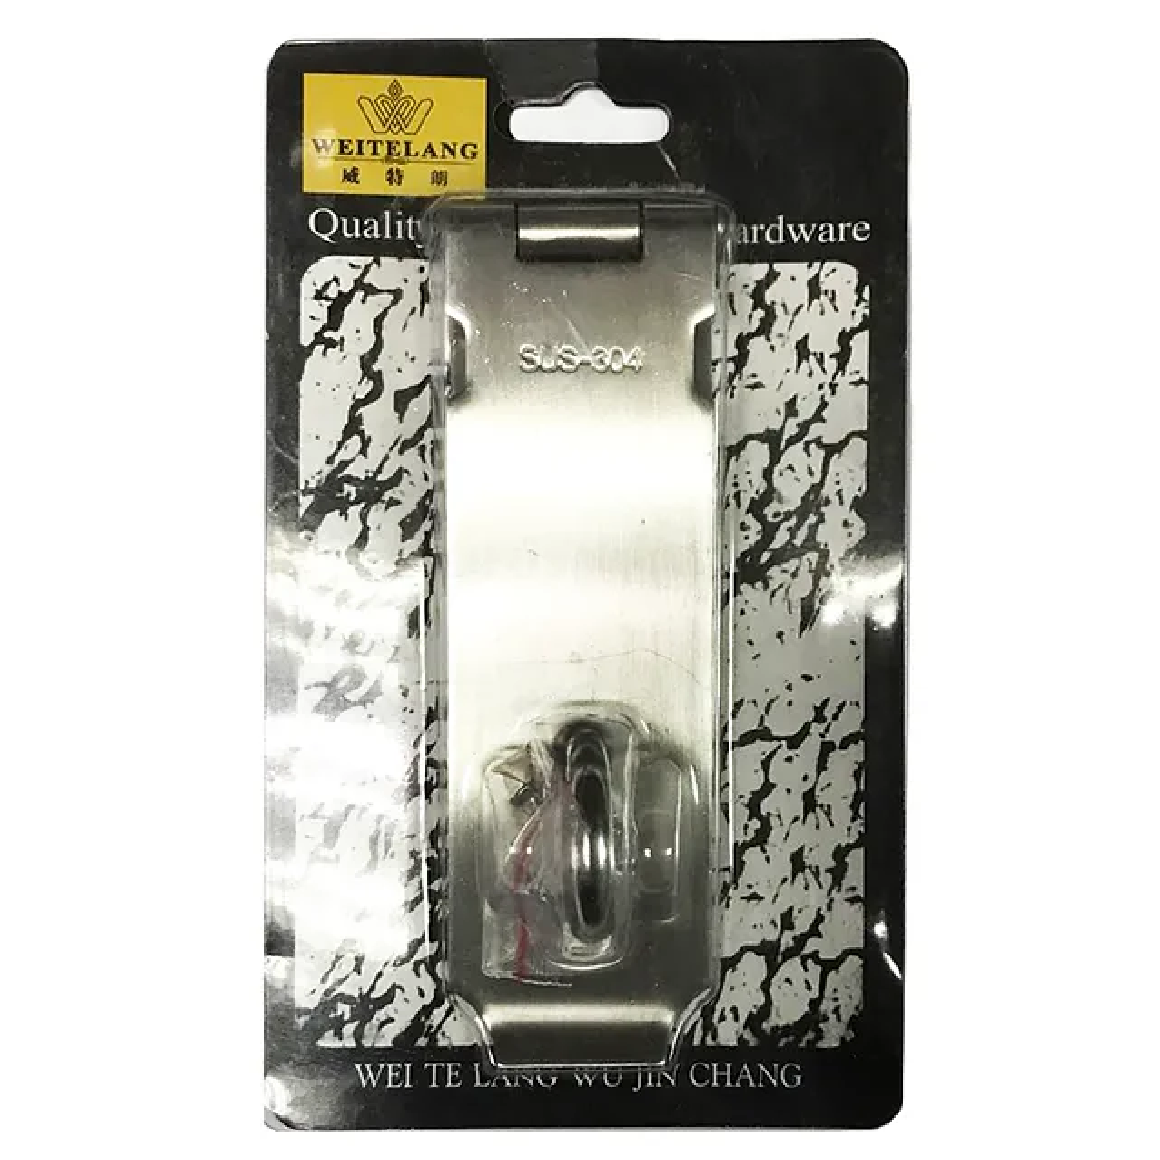 SUS-304 Stainless Steel HASP & STAPLE 4"/100MM